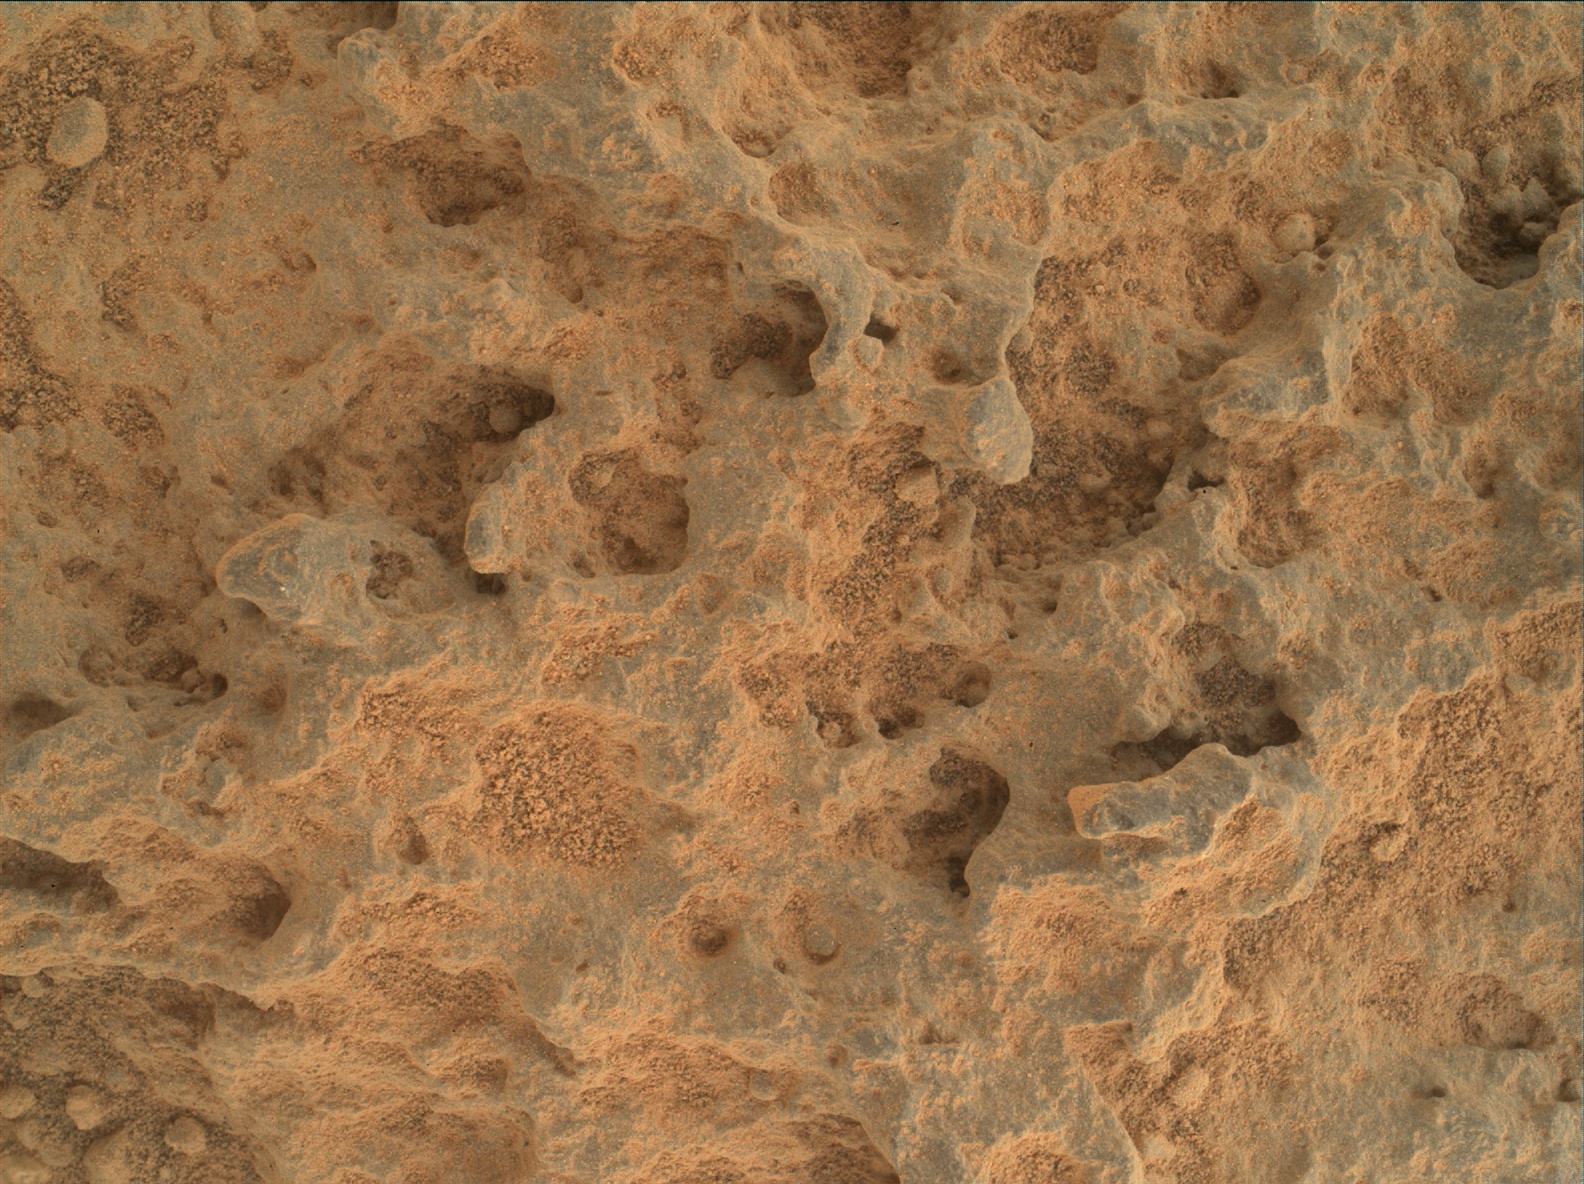 Nasa's Mars rover Curiosity acquired this image using its Mars Hand Lens Imager (MAHLI) on Sol 324